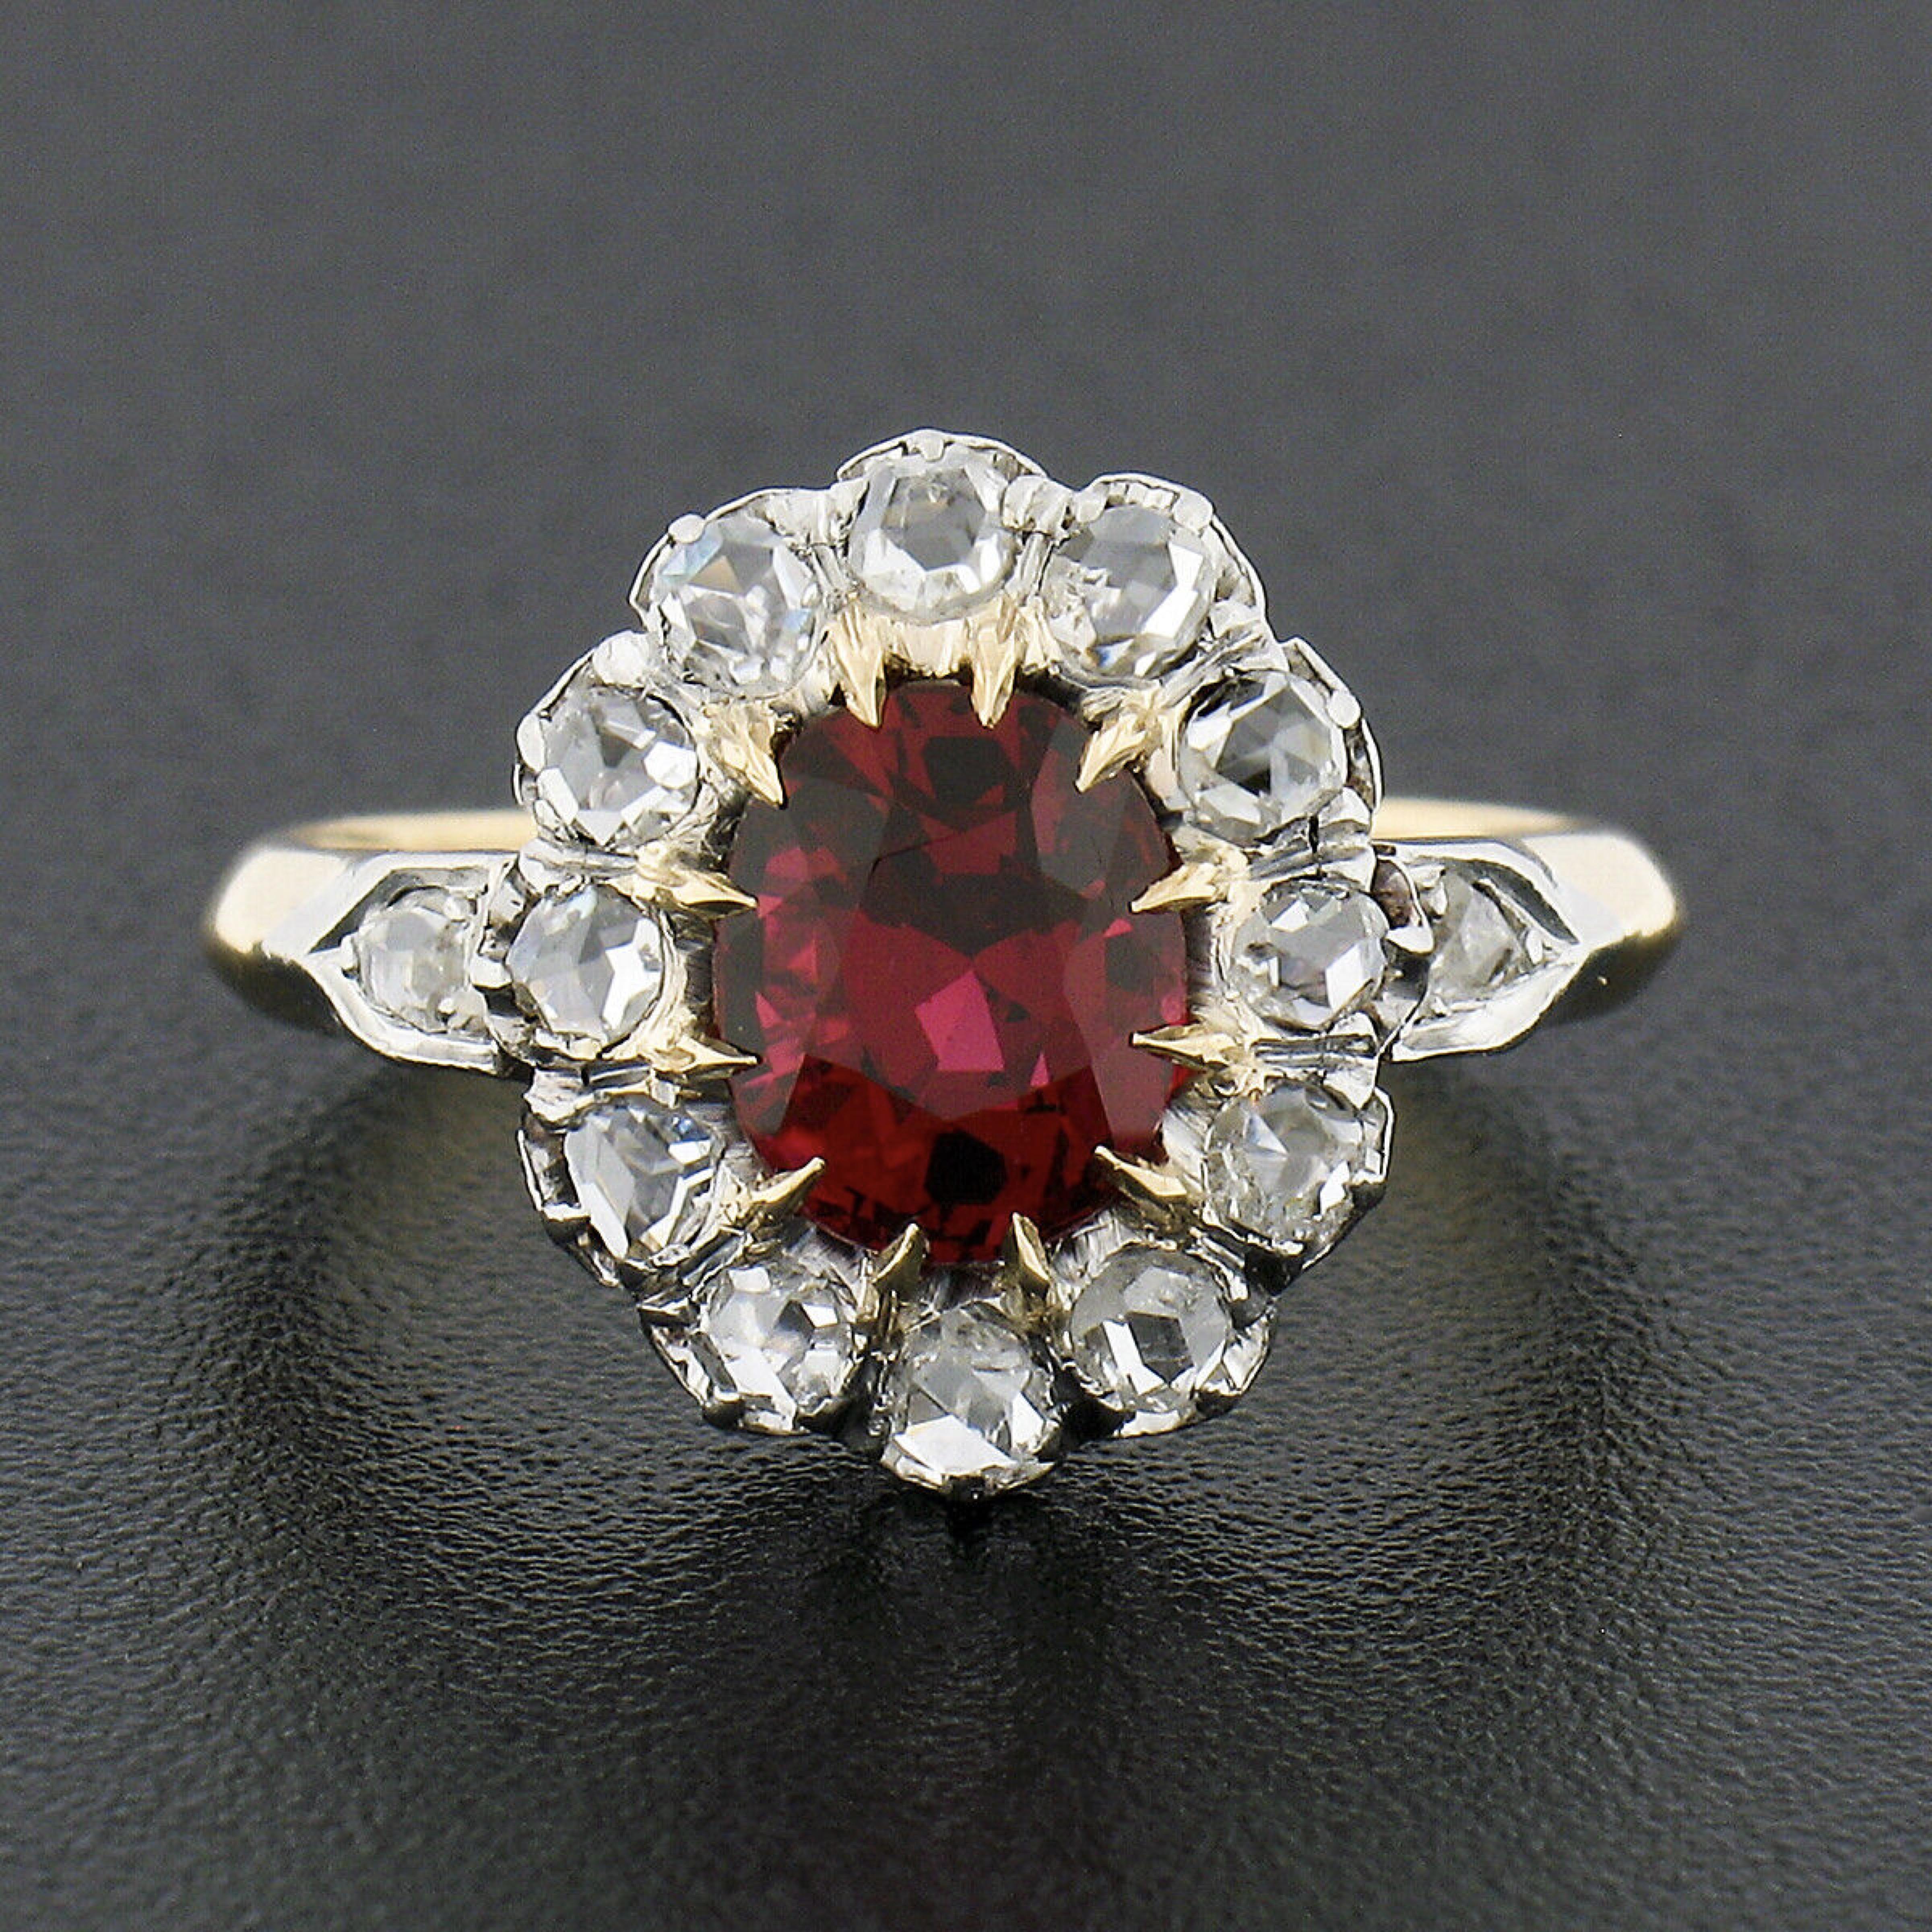 This truly breathtaking antique ring was crafted during the Victorian era from solid 18k yellow gold with a platinum top. It features an elegant flower cluster design set with a, GIA certified, natural spinel stone at its center. This gorgeous